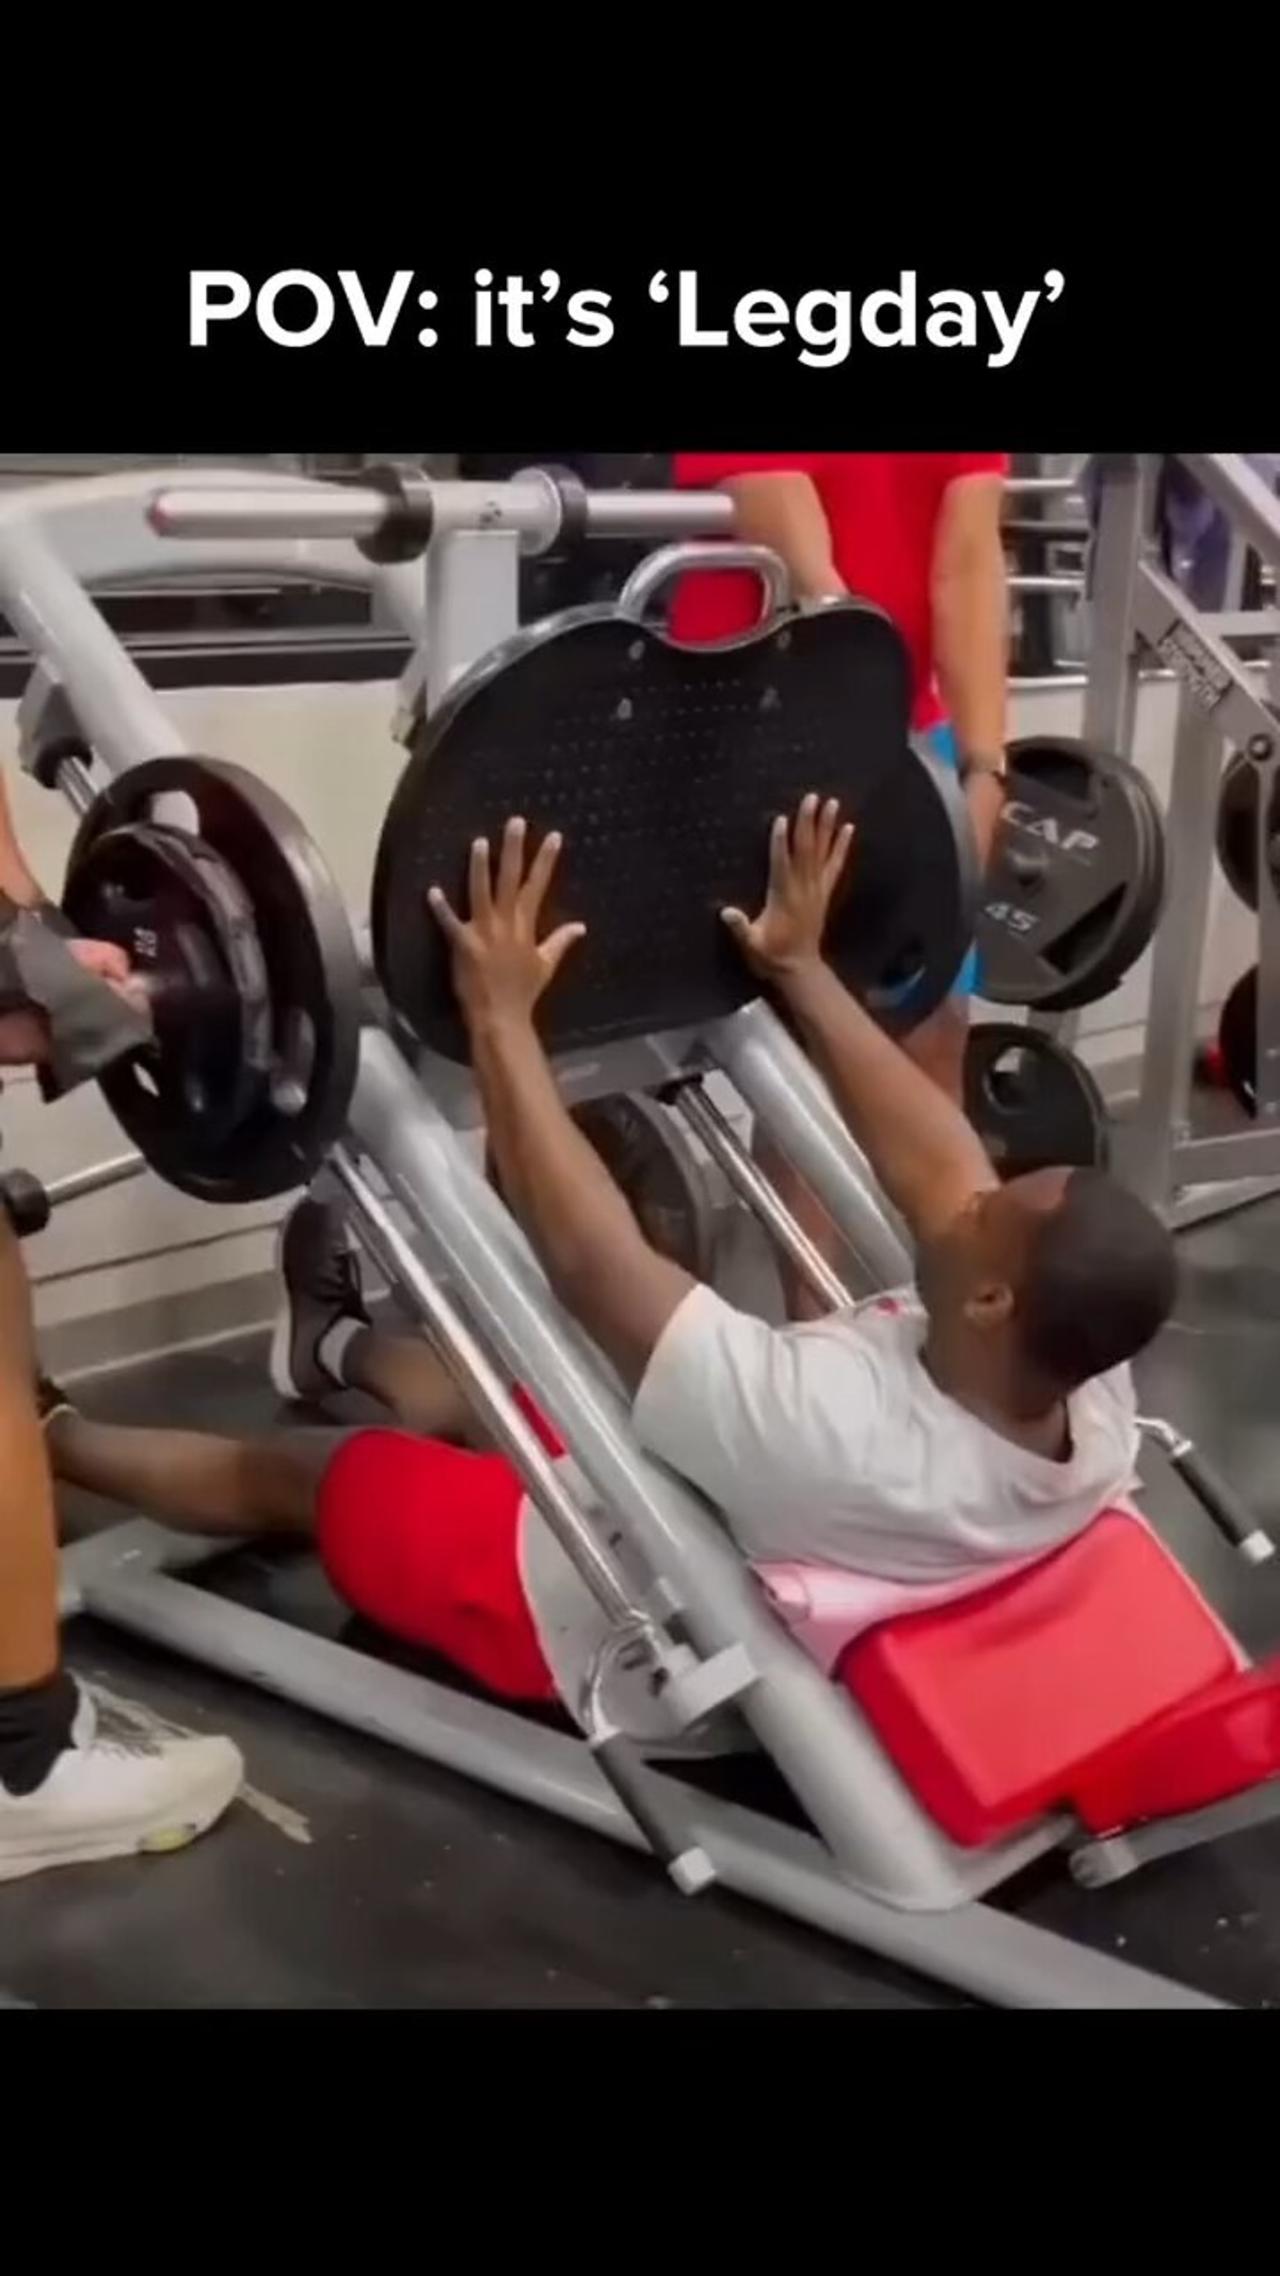 A funny gym video that all of us gym junkies can relate to!